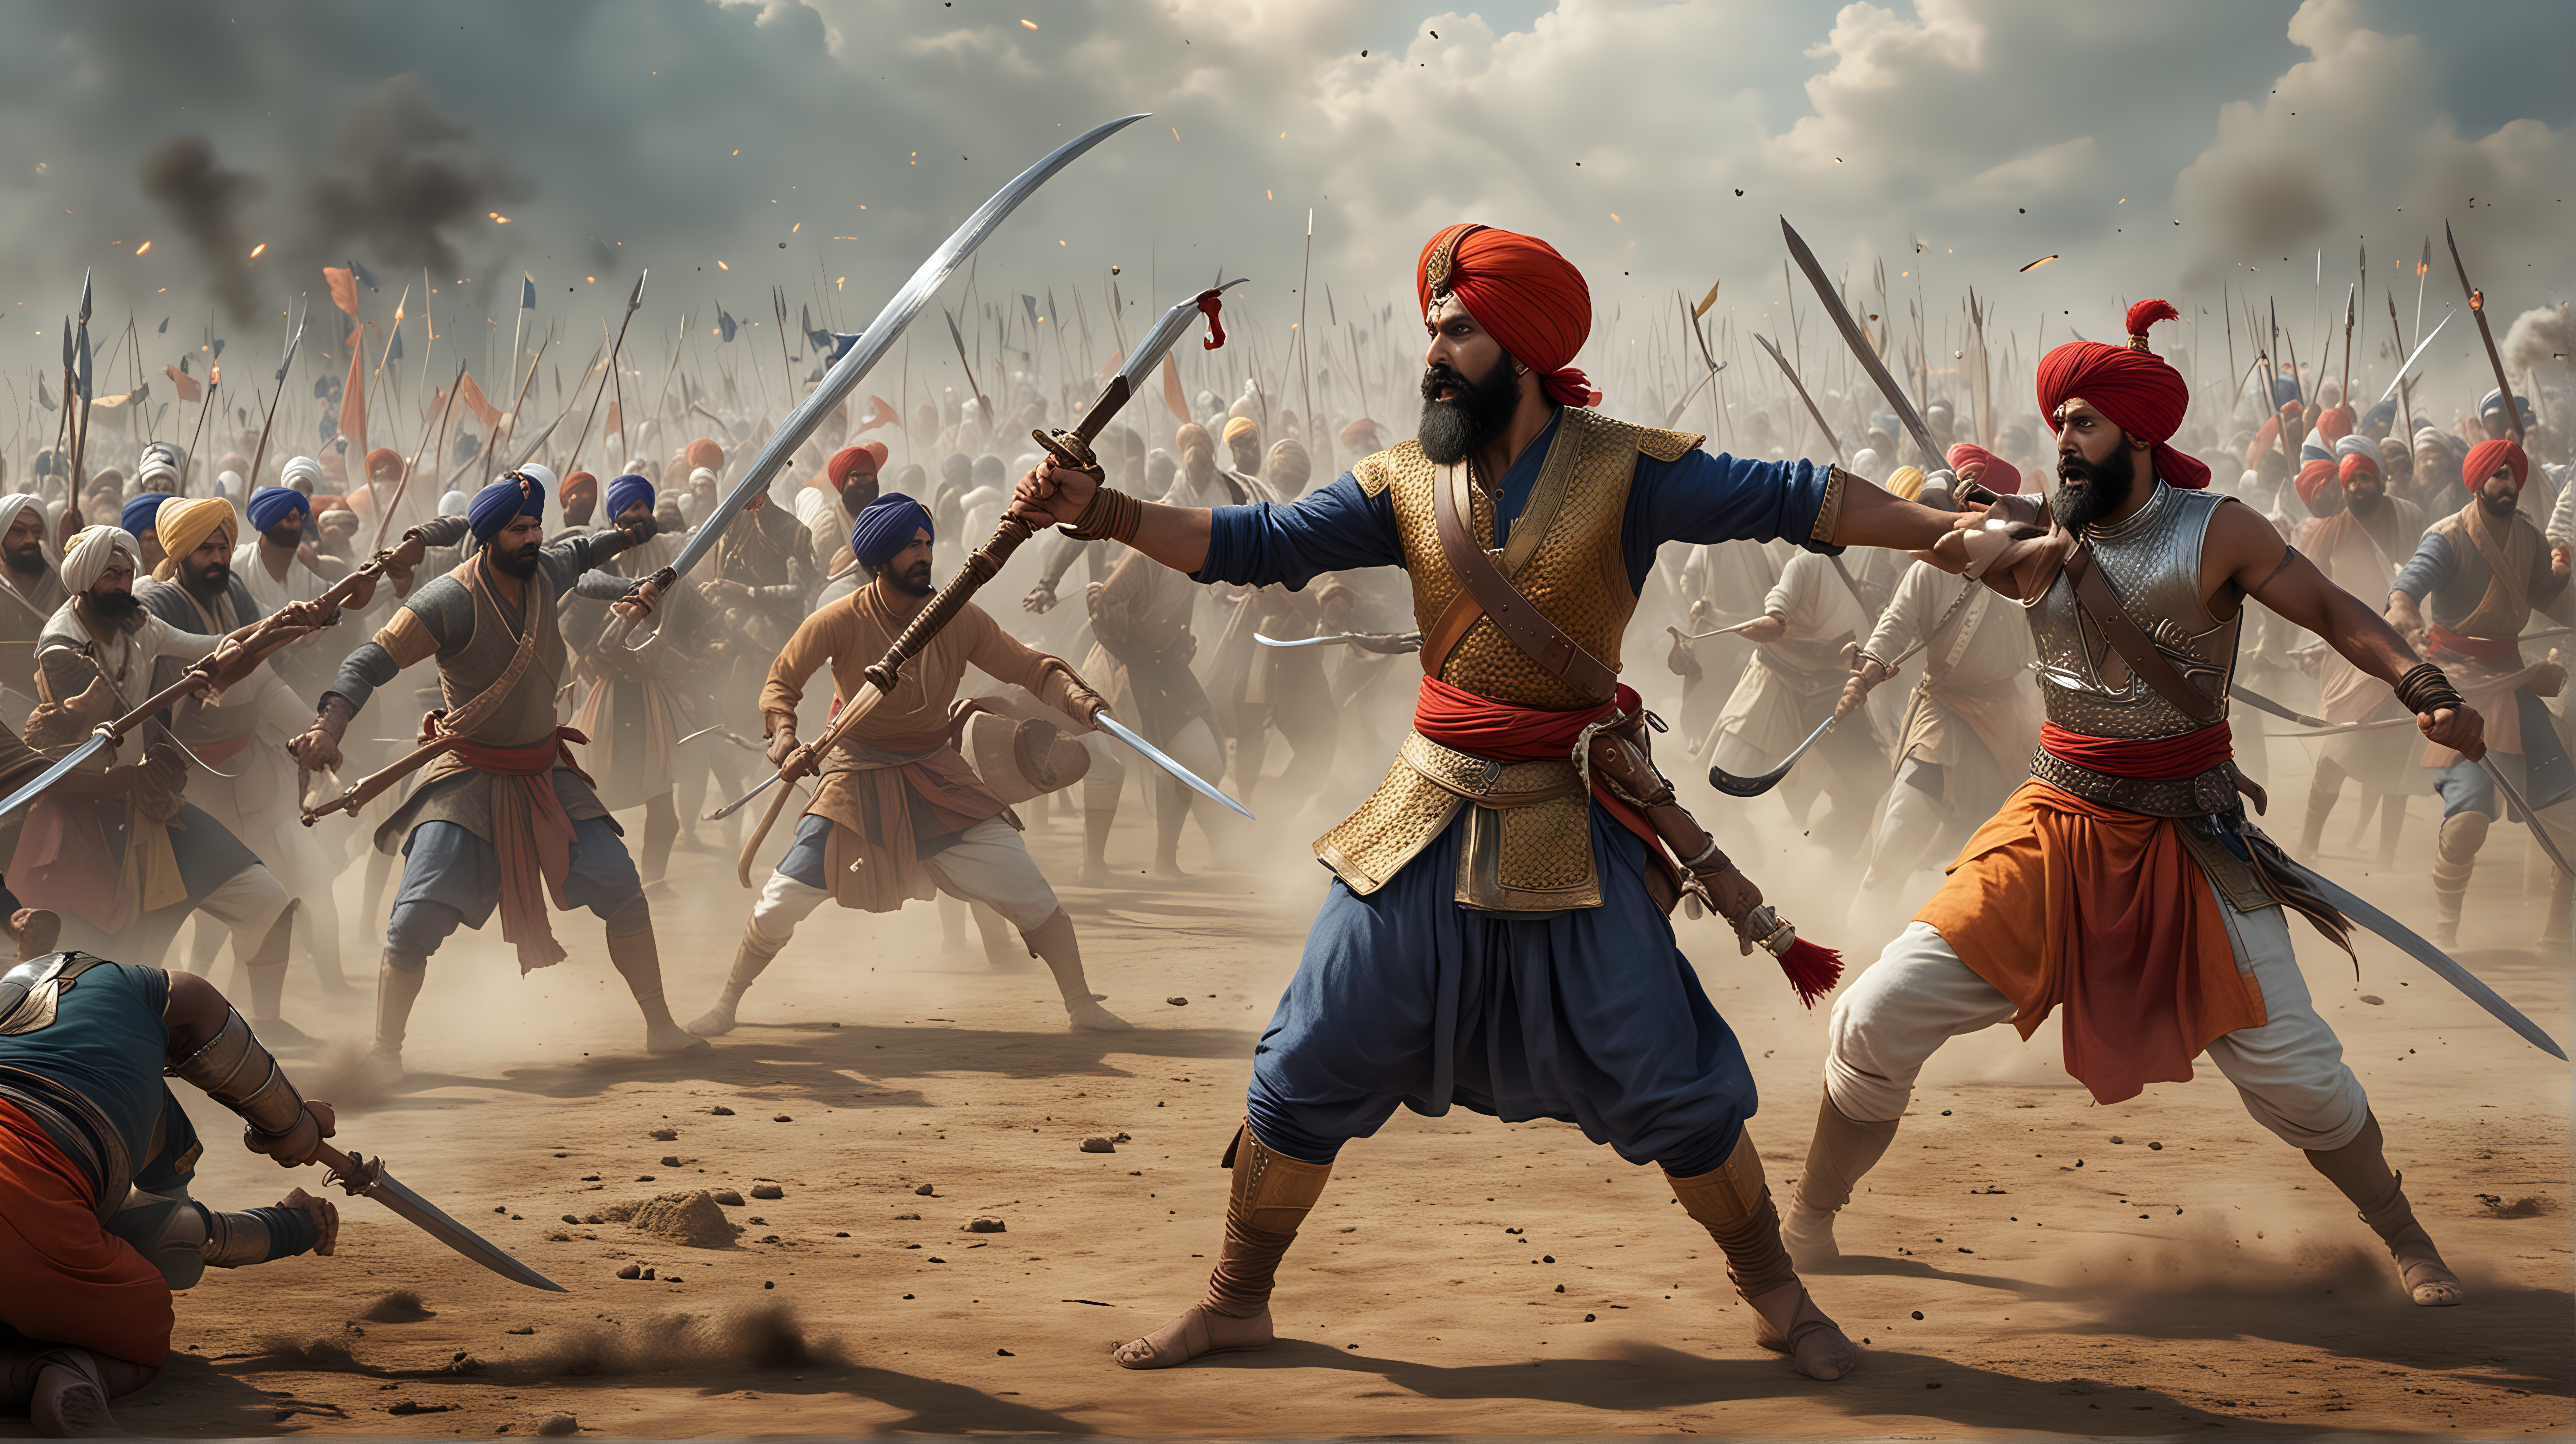 Sikh Warriors Clash with the Mughal Empire Historical Battle Scene Art